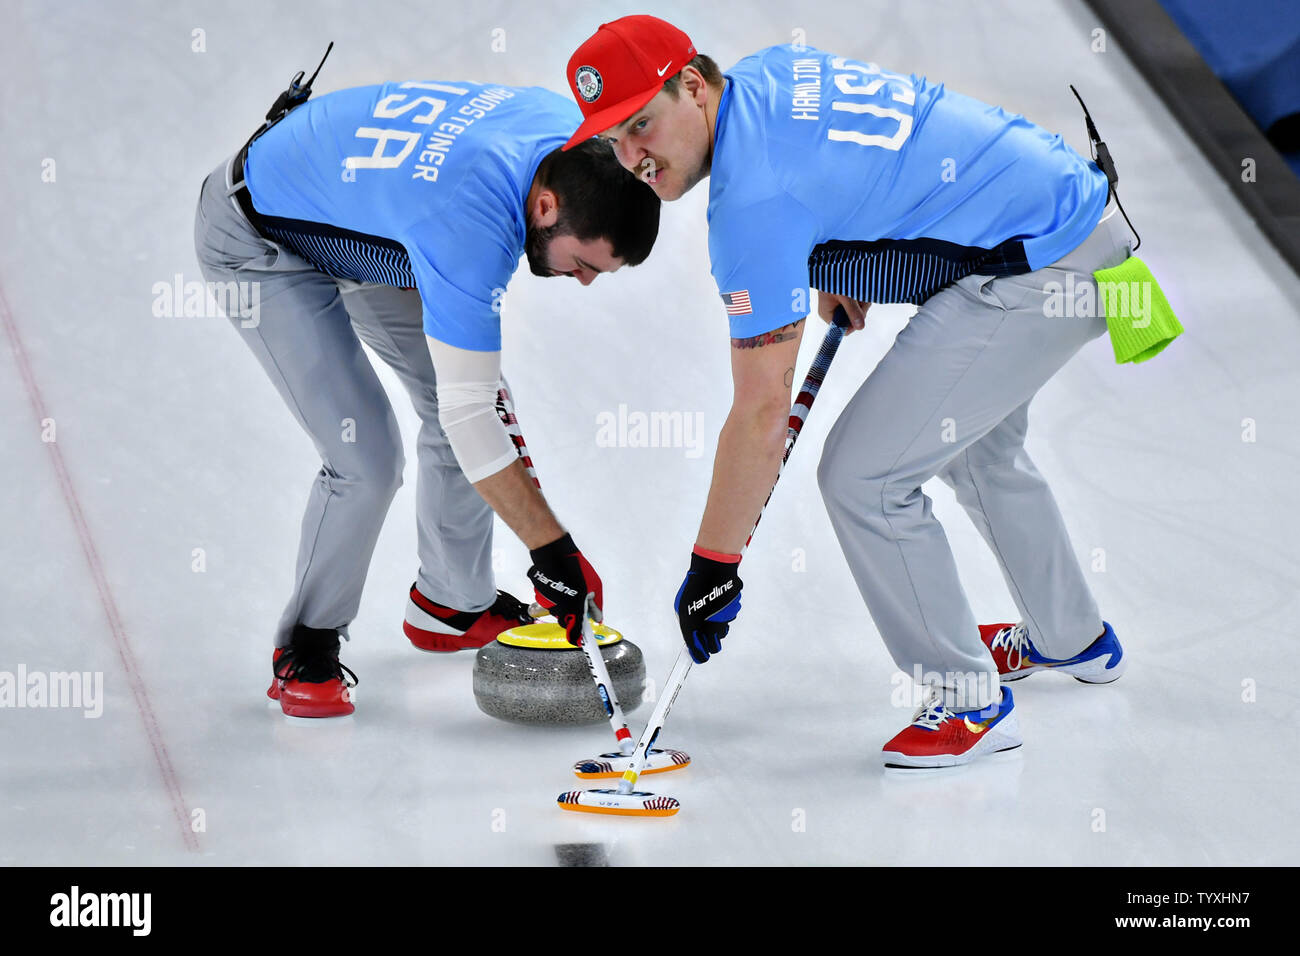 Matt Hamilton, right, and John Landsteiner of the United States sweep ahead of the stone during the Men's Curling finals at the Pyeongchang 2018 Winter Olympics, in the Gangneung Curling Centre in Gangneung, South Korea, on February 24, 2018. The USA won the gold medal for the first time beating Sweden who took the silver and Switzerland the bronze. Photo by Richard Ellis/UPI Stock Photo